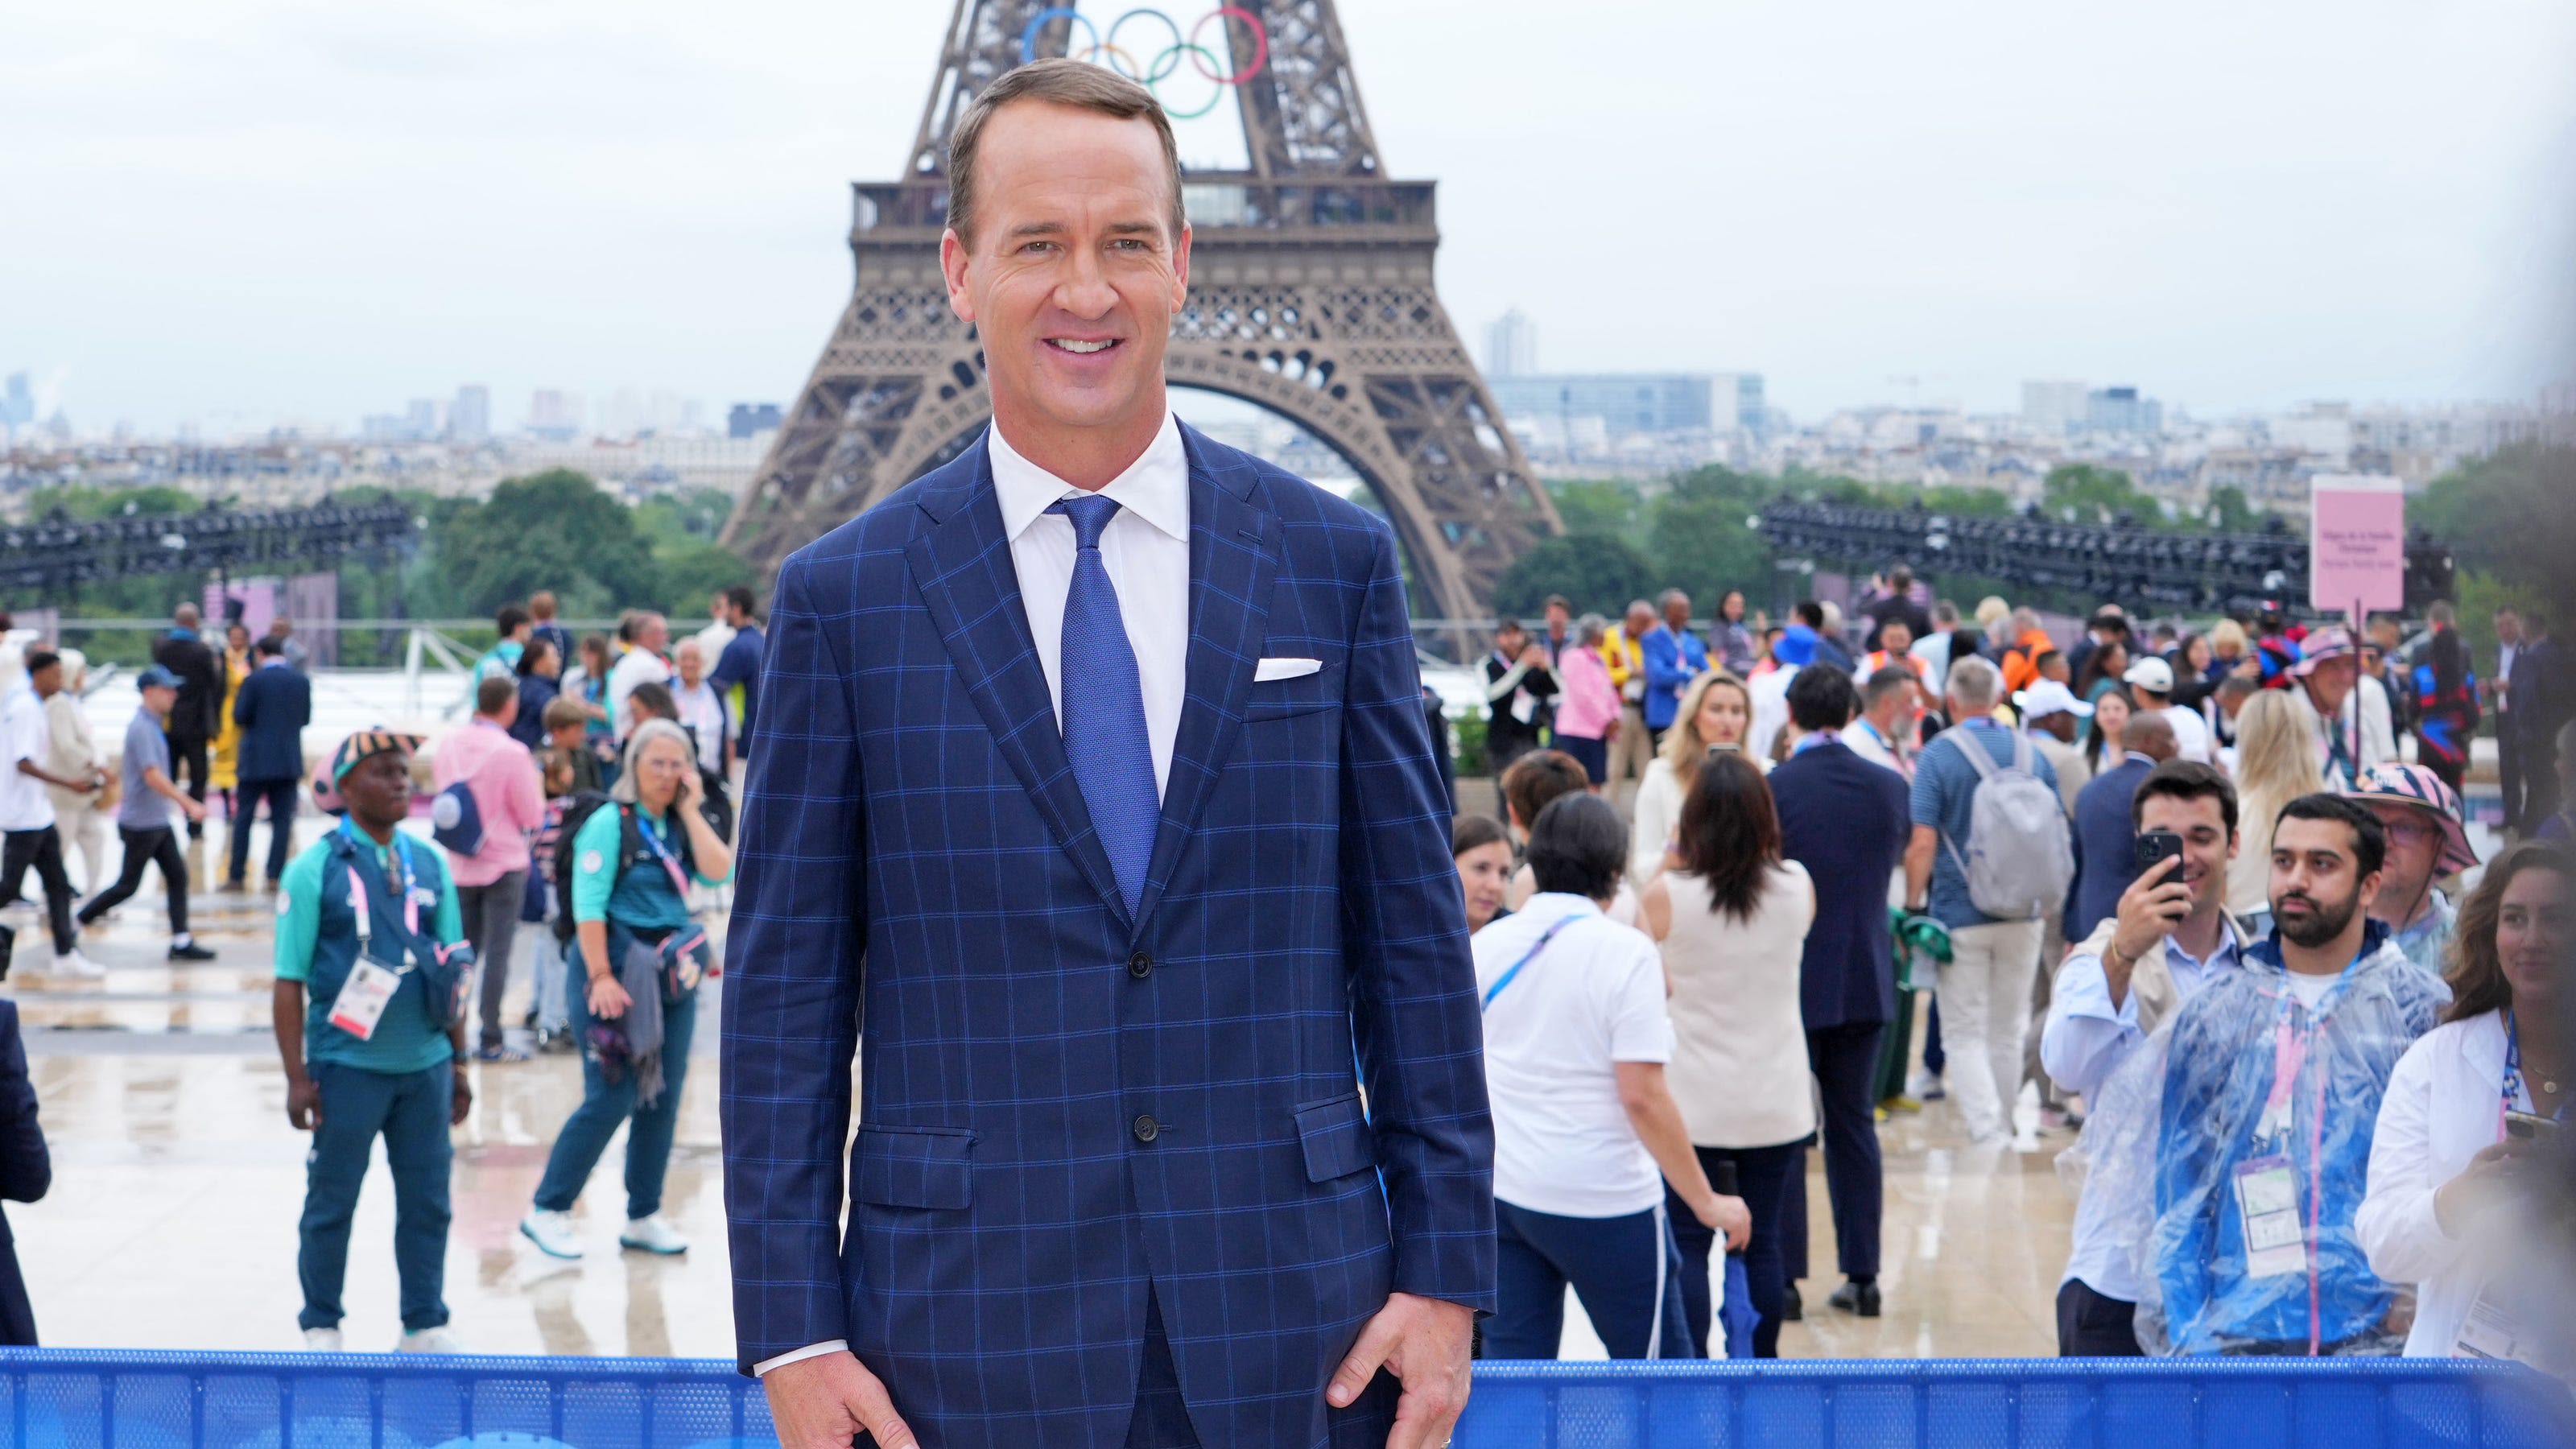 NBC defends performances of Peyton Manning, Kelly Clarkson on opening ceremony